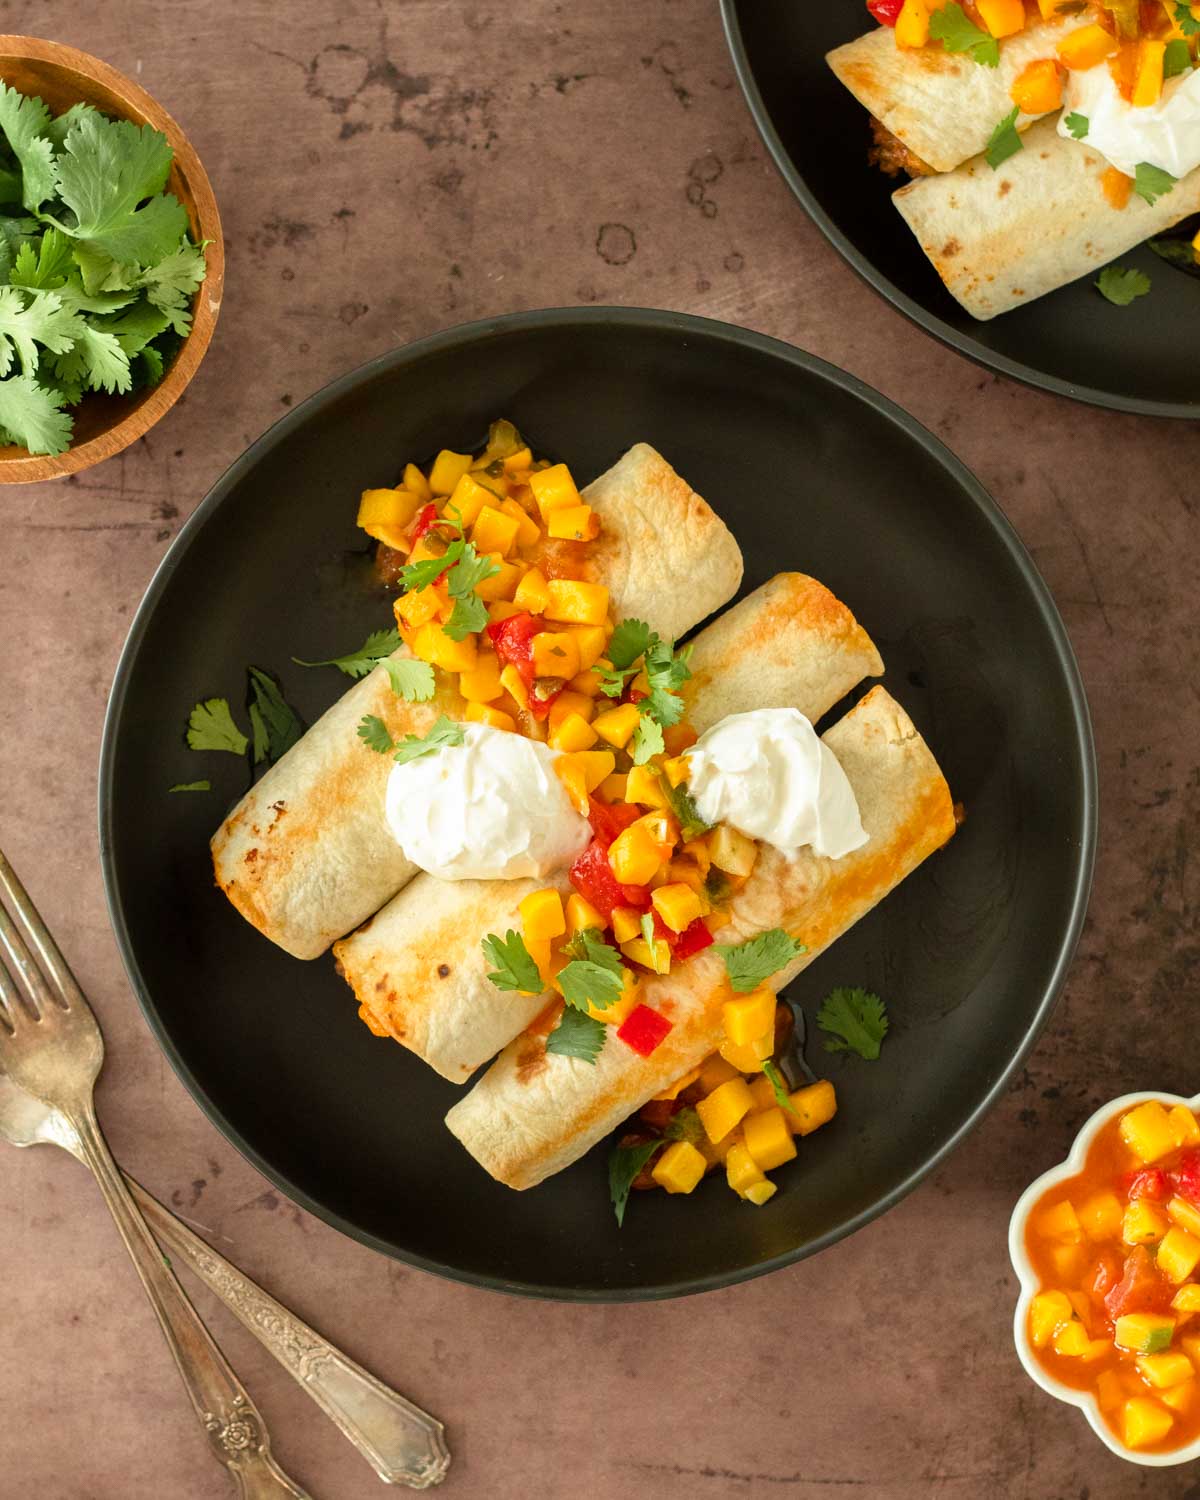 These easy beef taquitos are a 5-ingredient dinner recipe made with tortillas stuffed with a flavorful beef mixture and cheese. Serve these beef taquitos as an appetizer or for an easy dinner recipe.